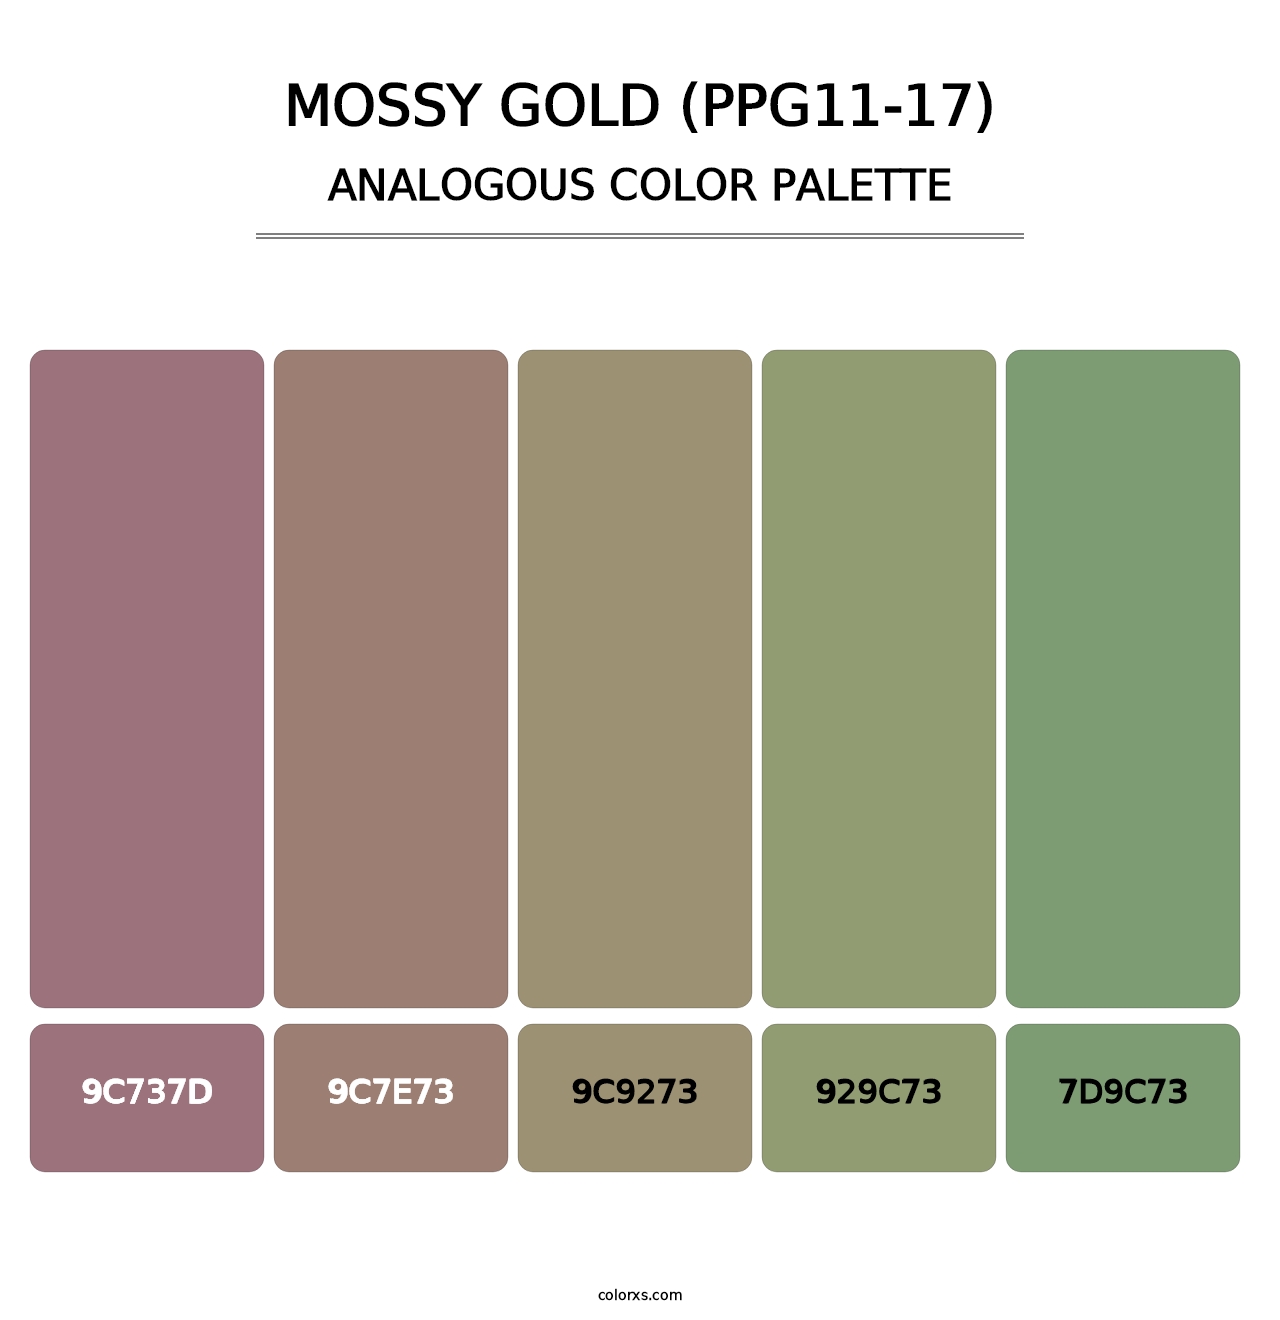 Mossy Gold (PPG11-17) - Analogous Color Palette